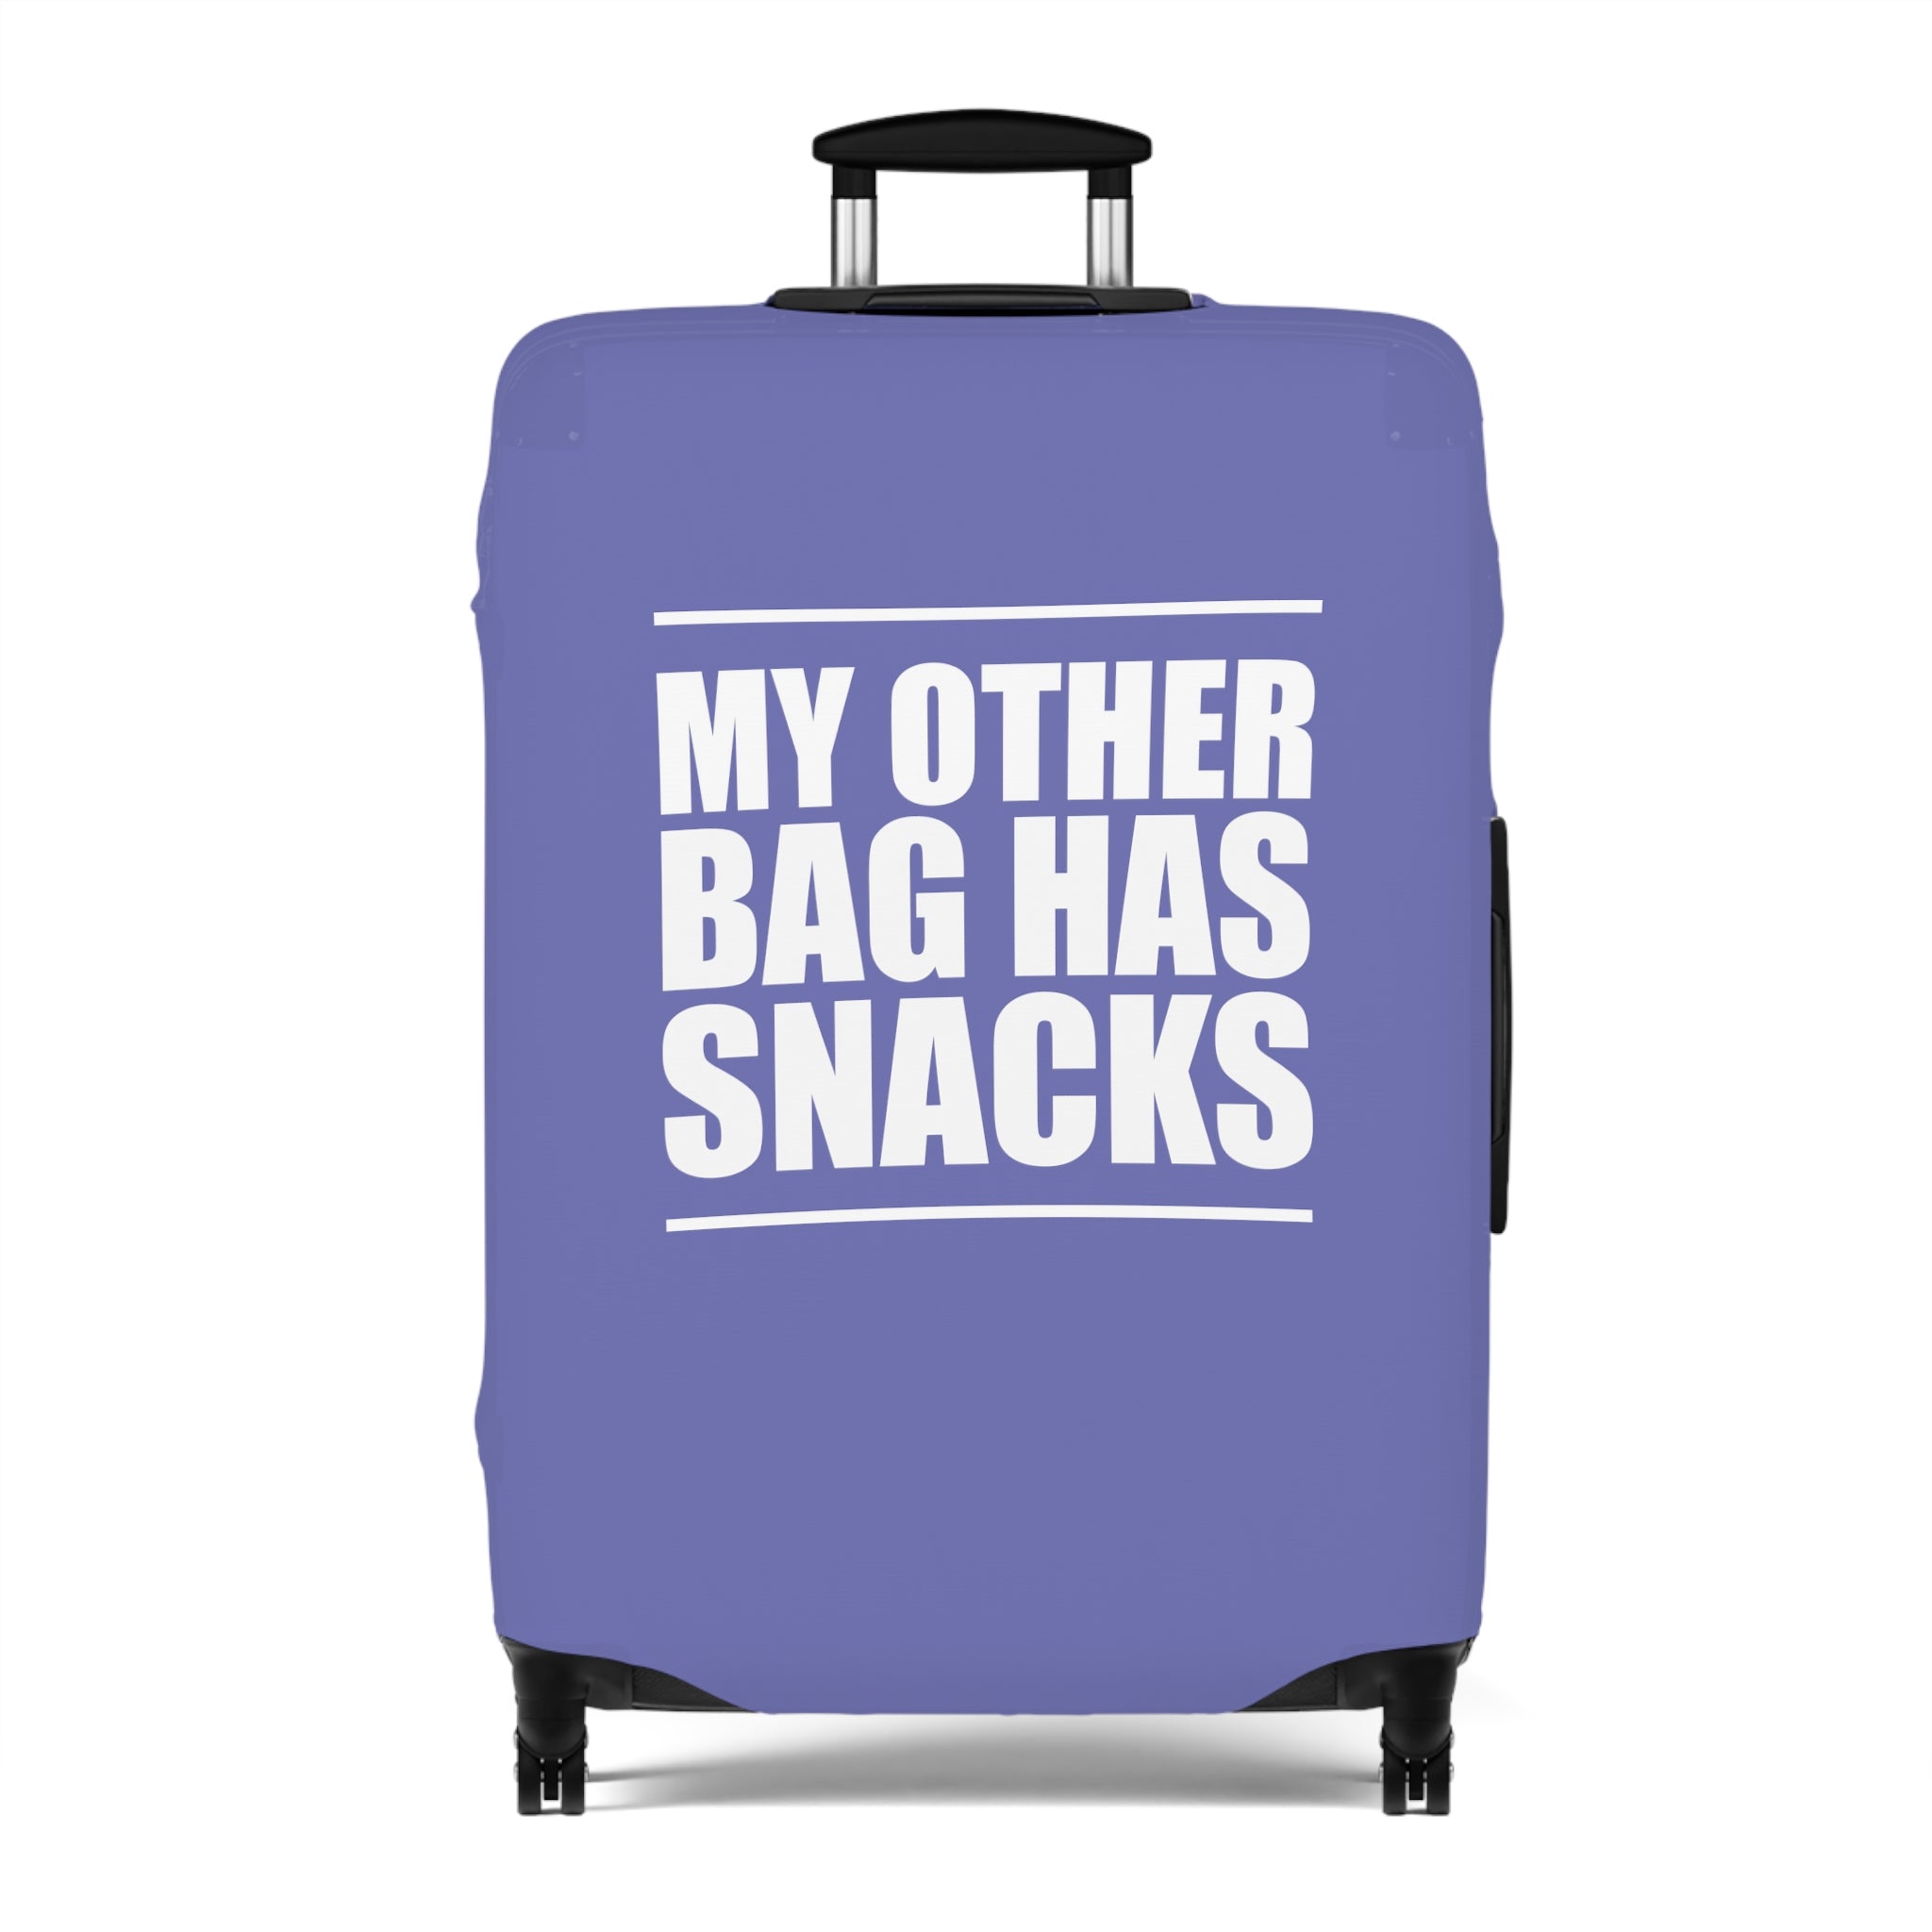 My other bag has snacks Luggage Cover (Purple)